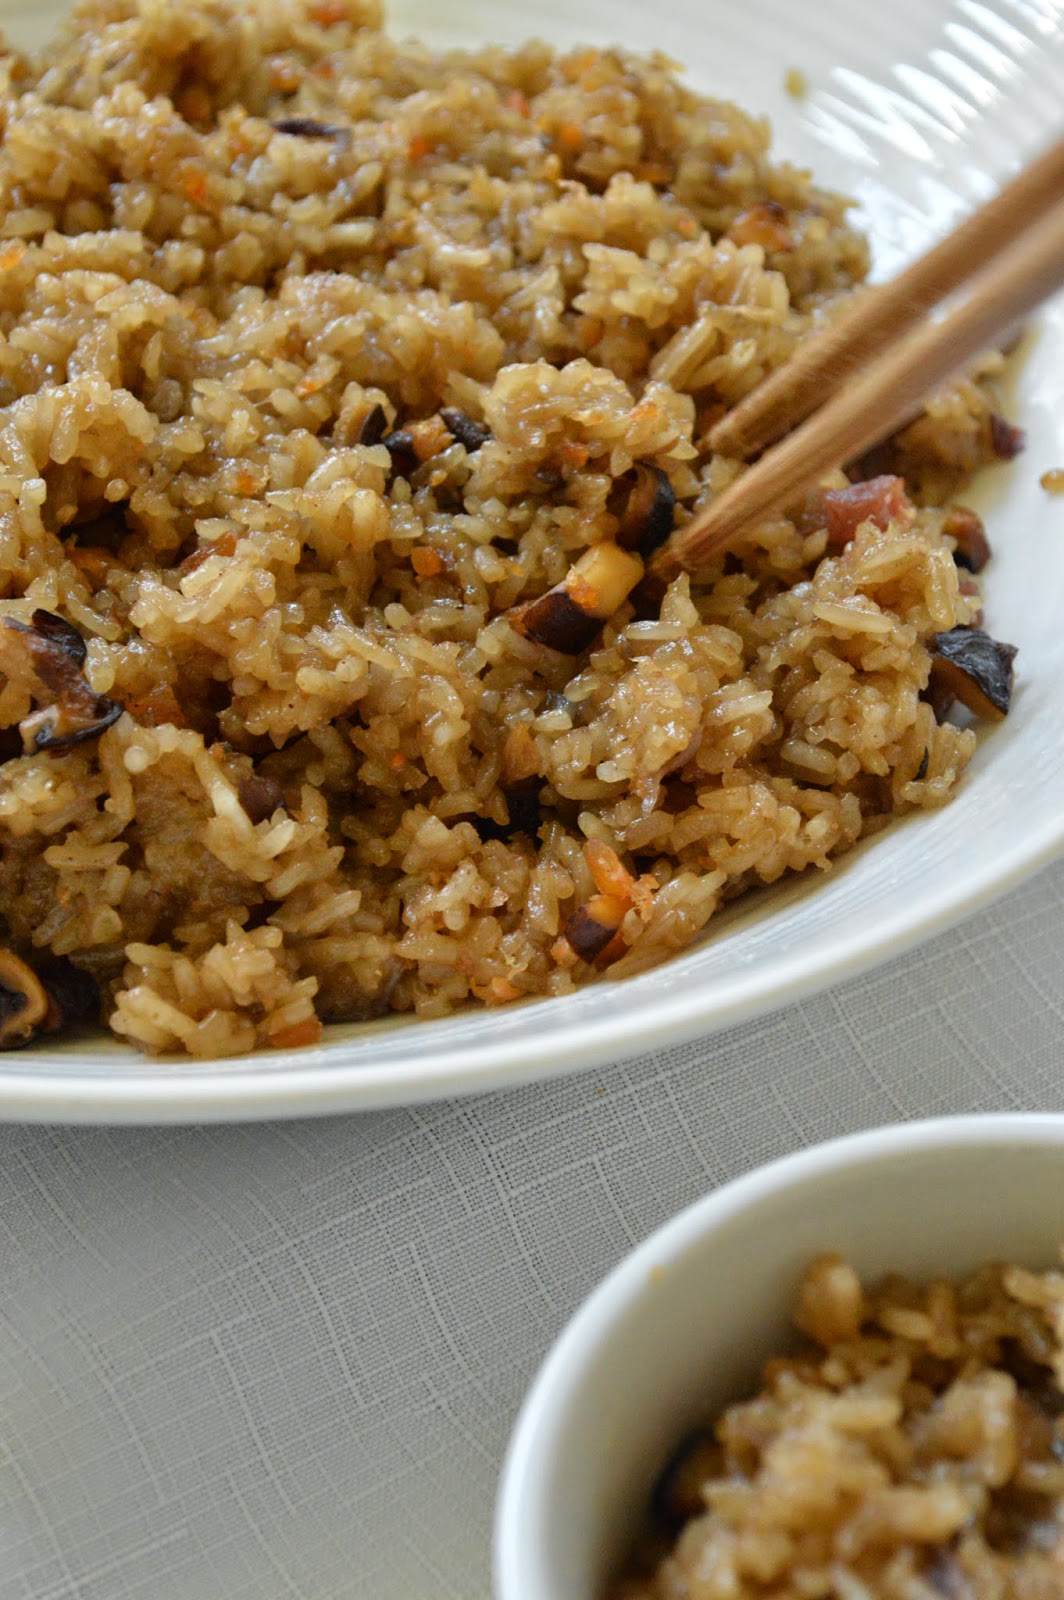 DimSumptuous: Chinese Sticky Rice 糯米飯